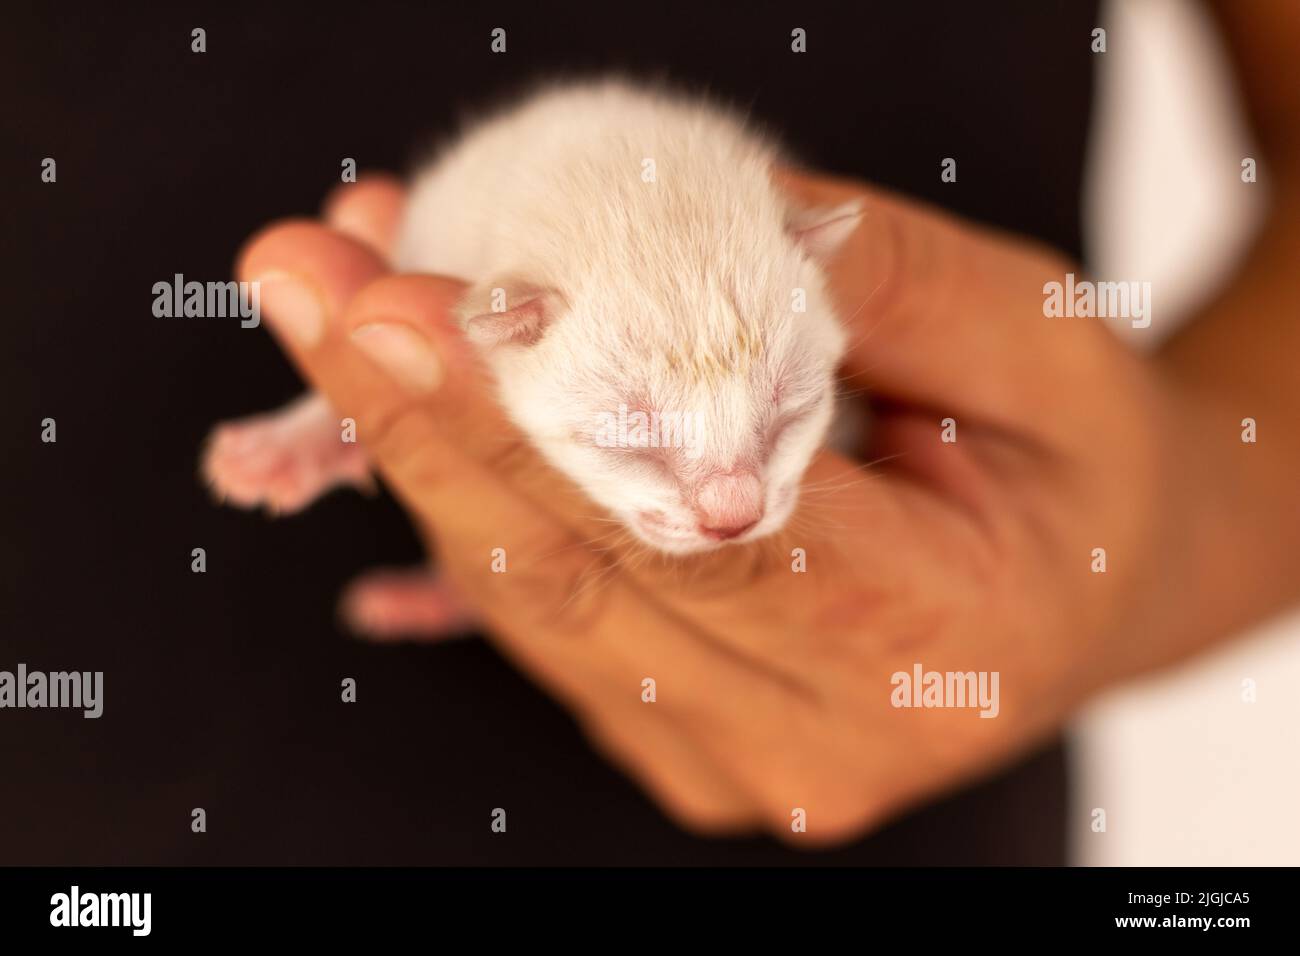 Small newborn cat held by the hand of a man dressed in black. Concept of frailty in newborns. Stock Photo